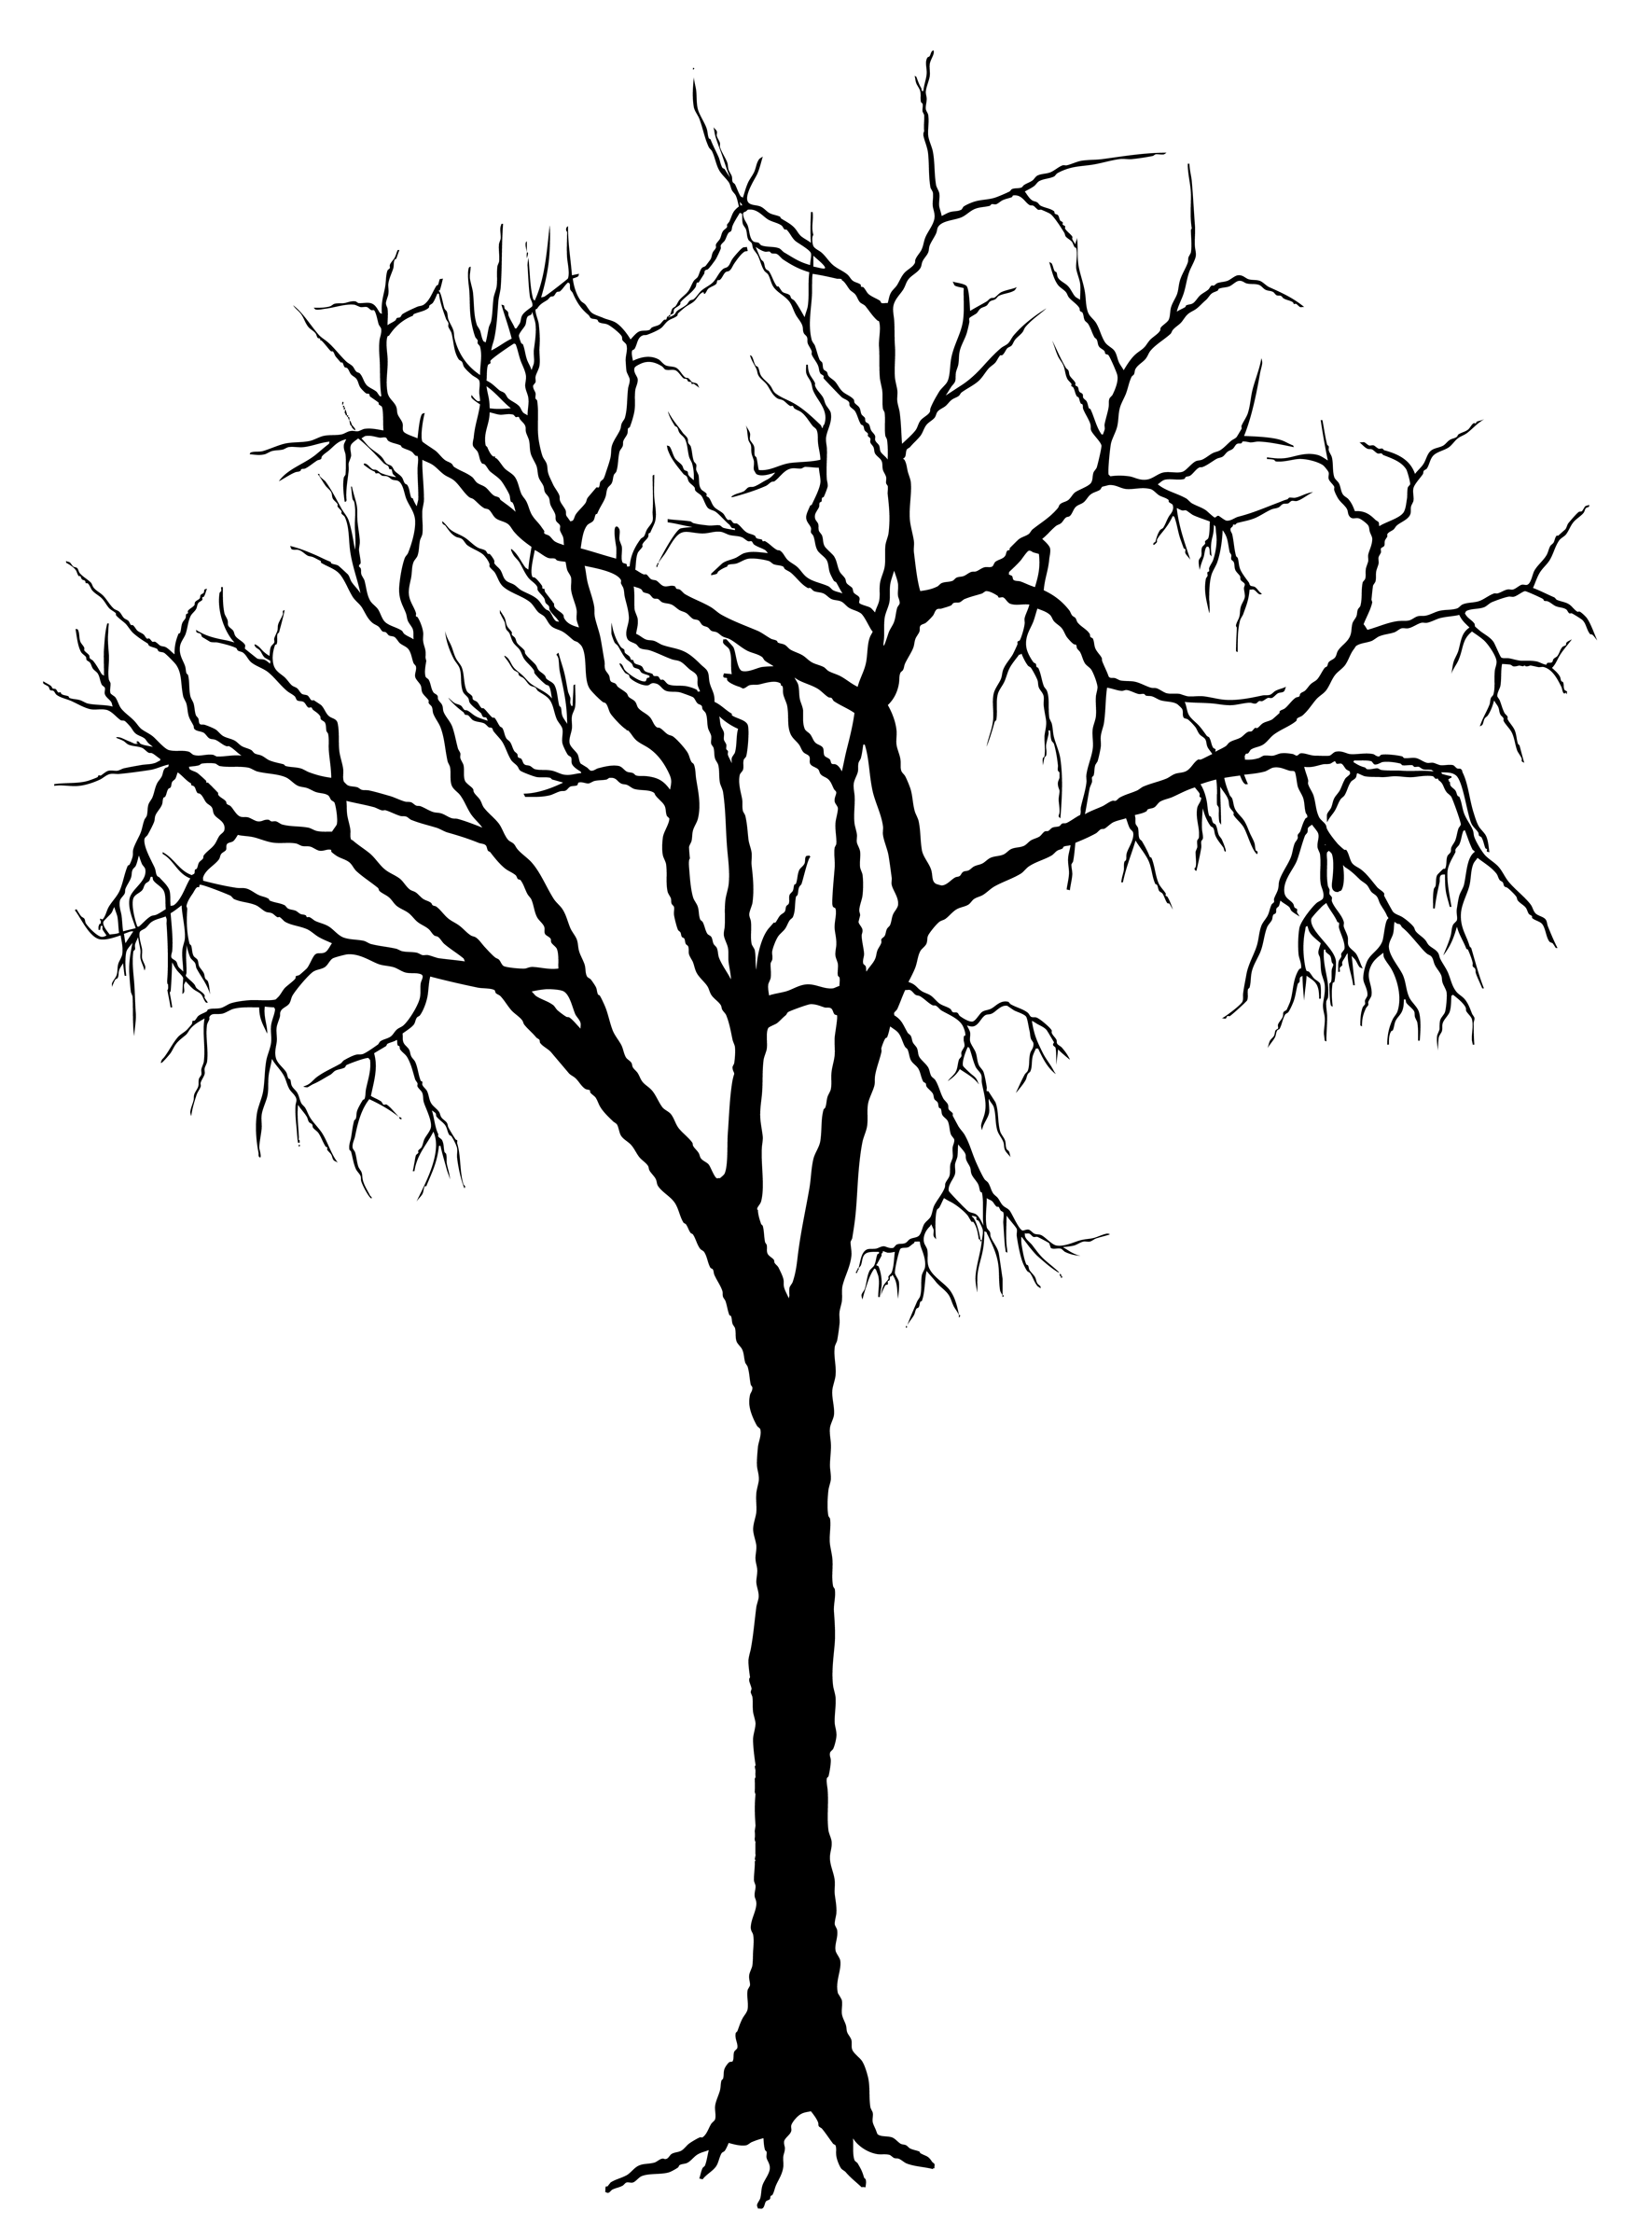 Tree Silhouette Clip Art Silhouettes   Clipart Best   Clipart Best